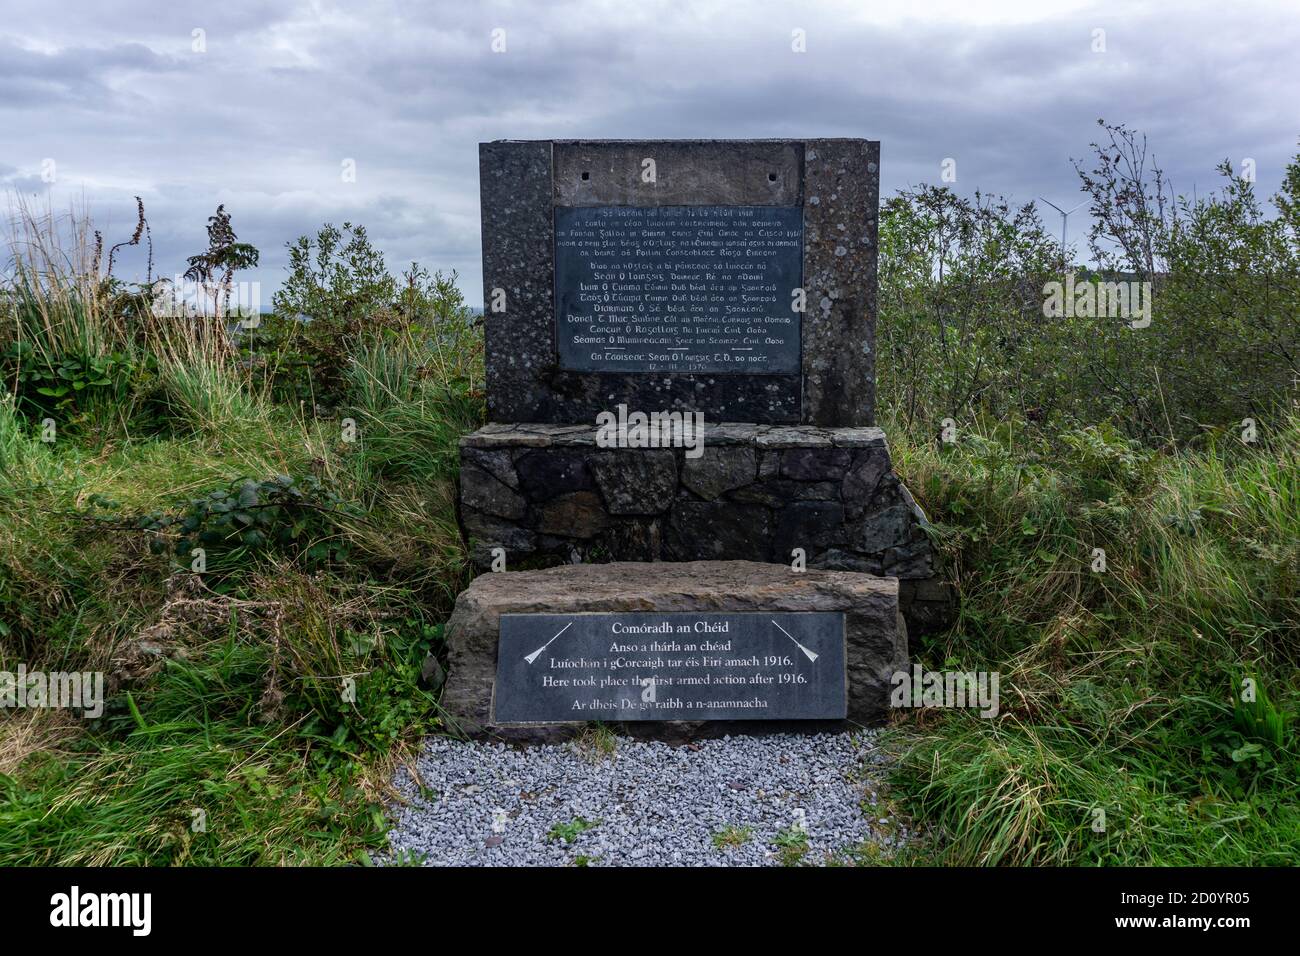 In Béal a’ Ghleanna in Cork, Ireland, a memorial to commemorate the first armed conflict to take place after the 1916 uprising. Stock Photo